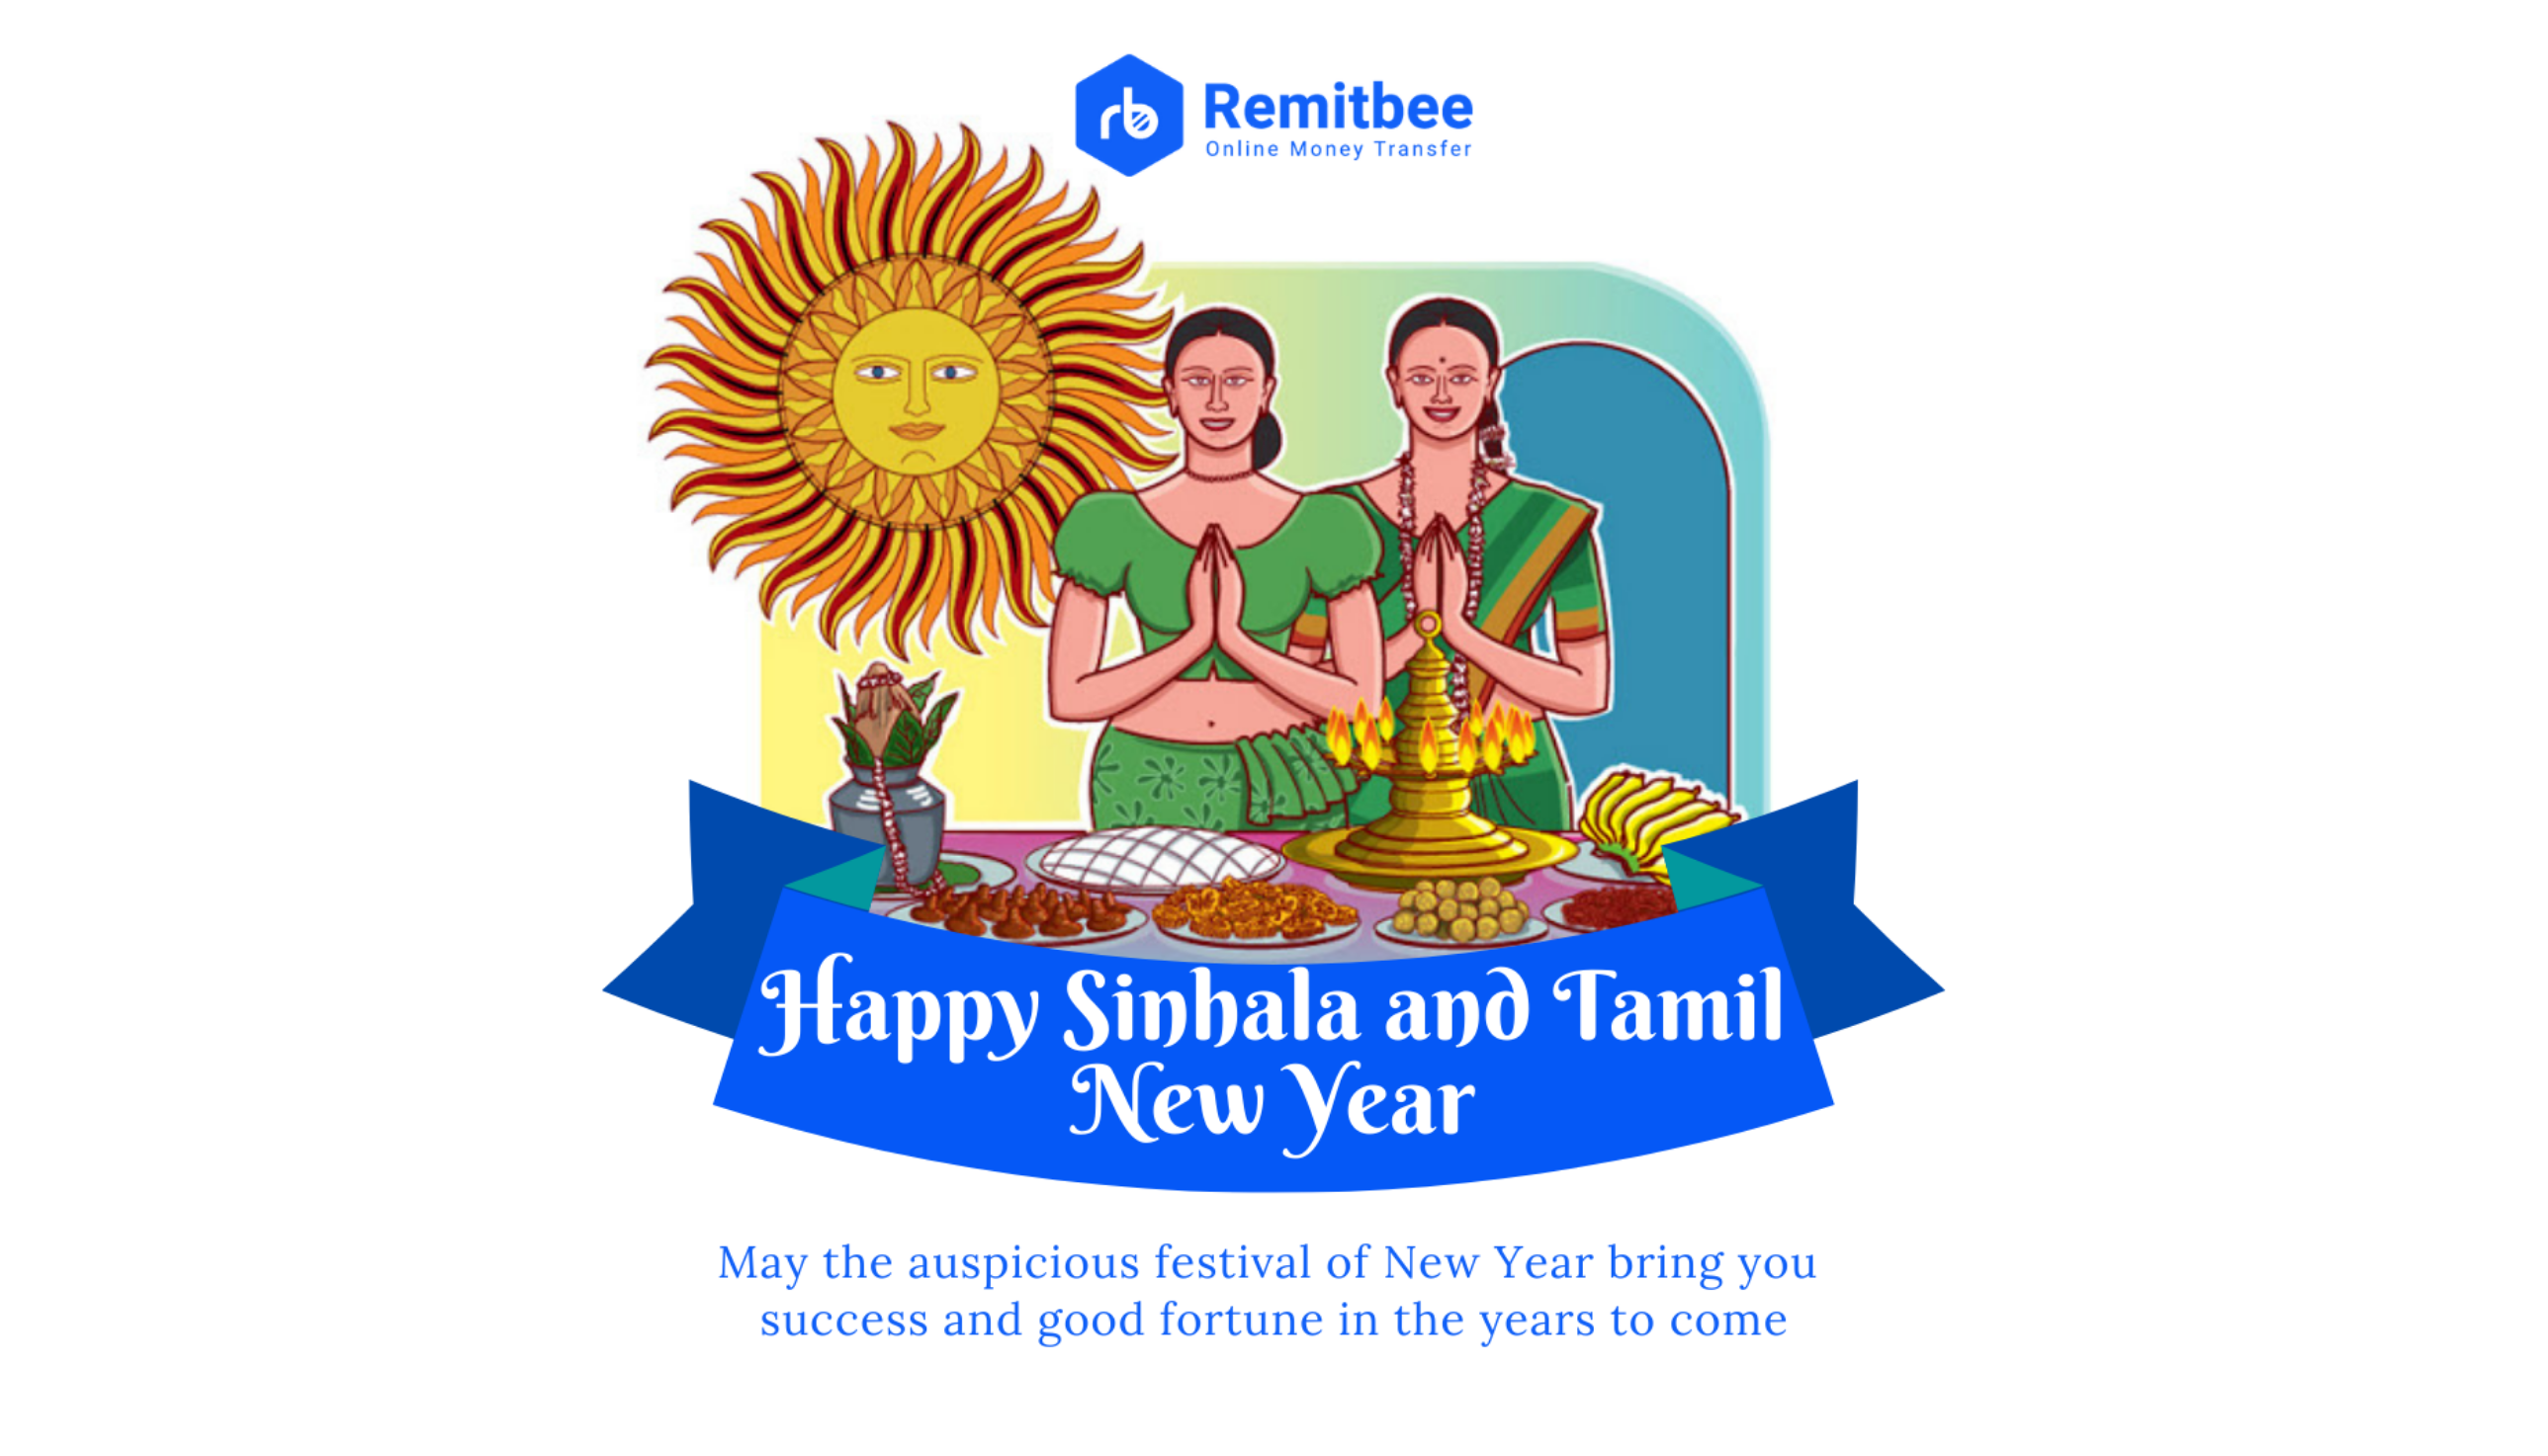 Sinhala And Tamil New Year Remitbee